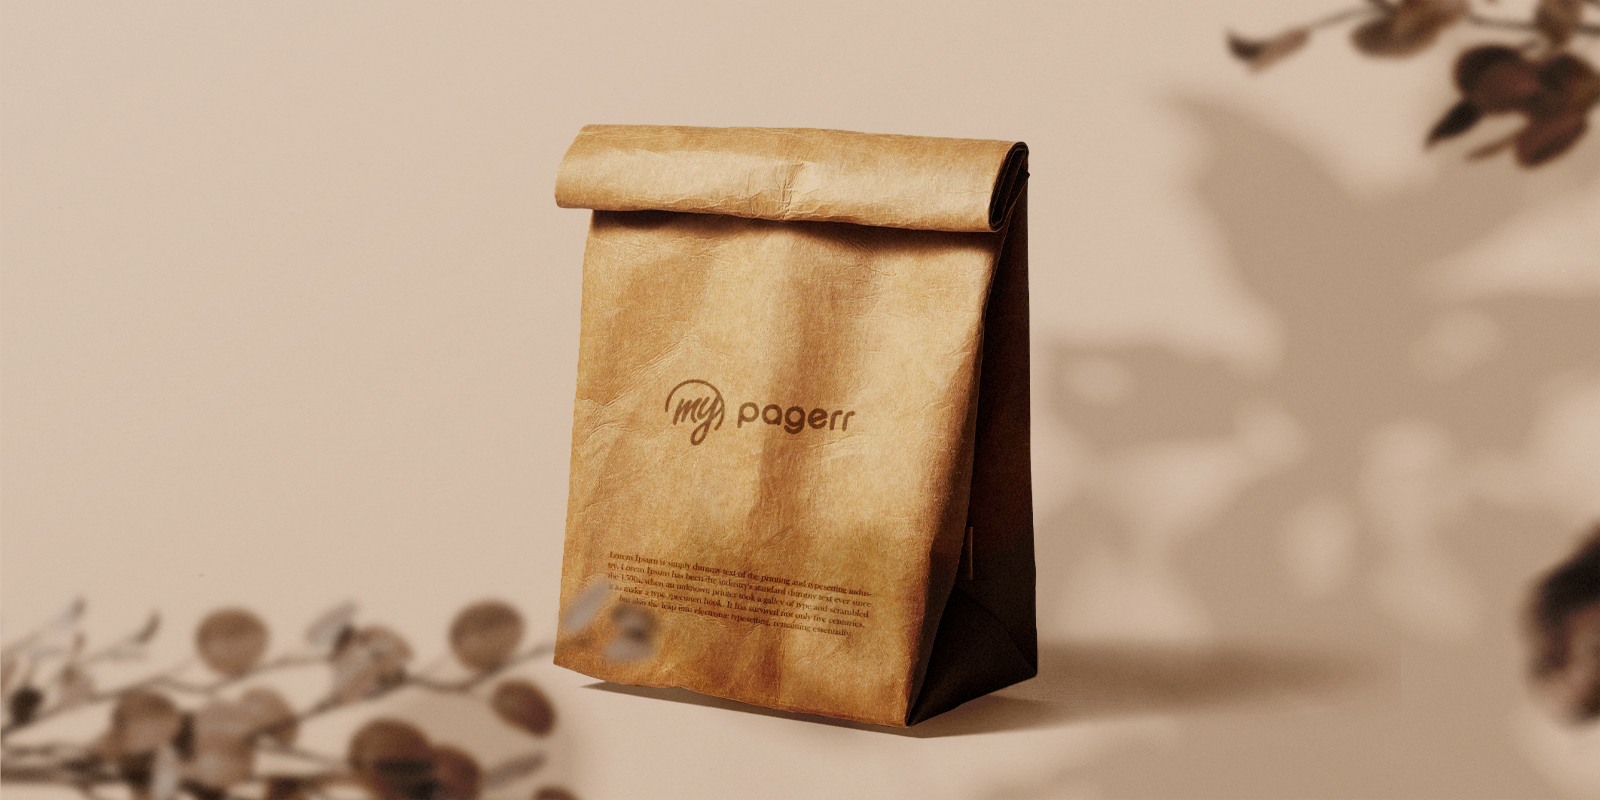 Kraft paper bags in Madrid - Print with Pagerr